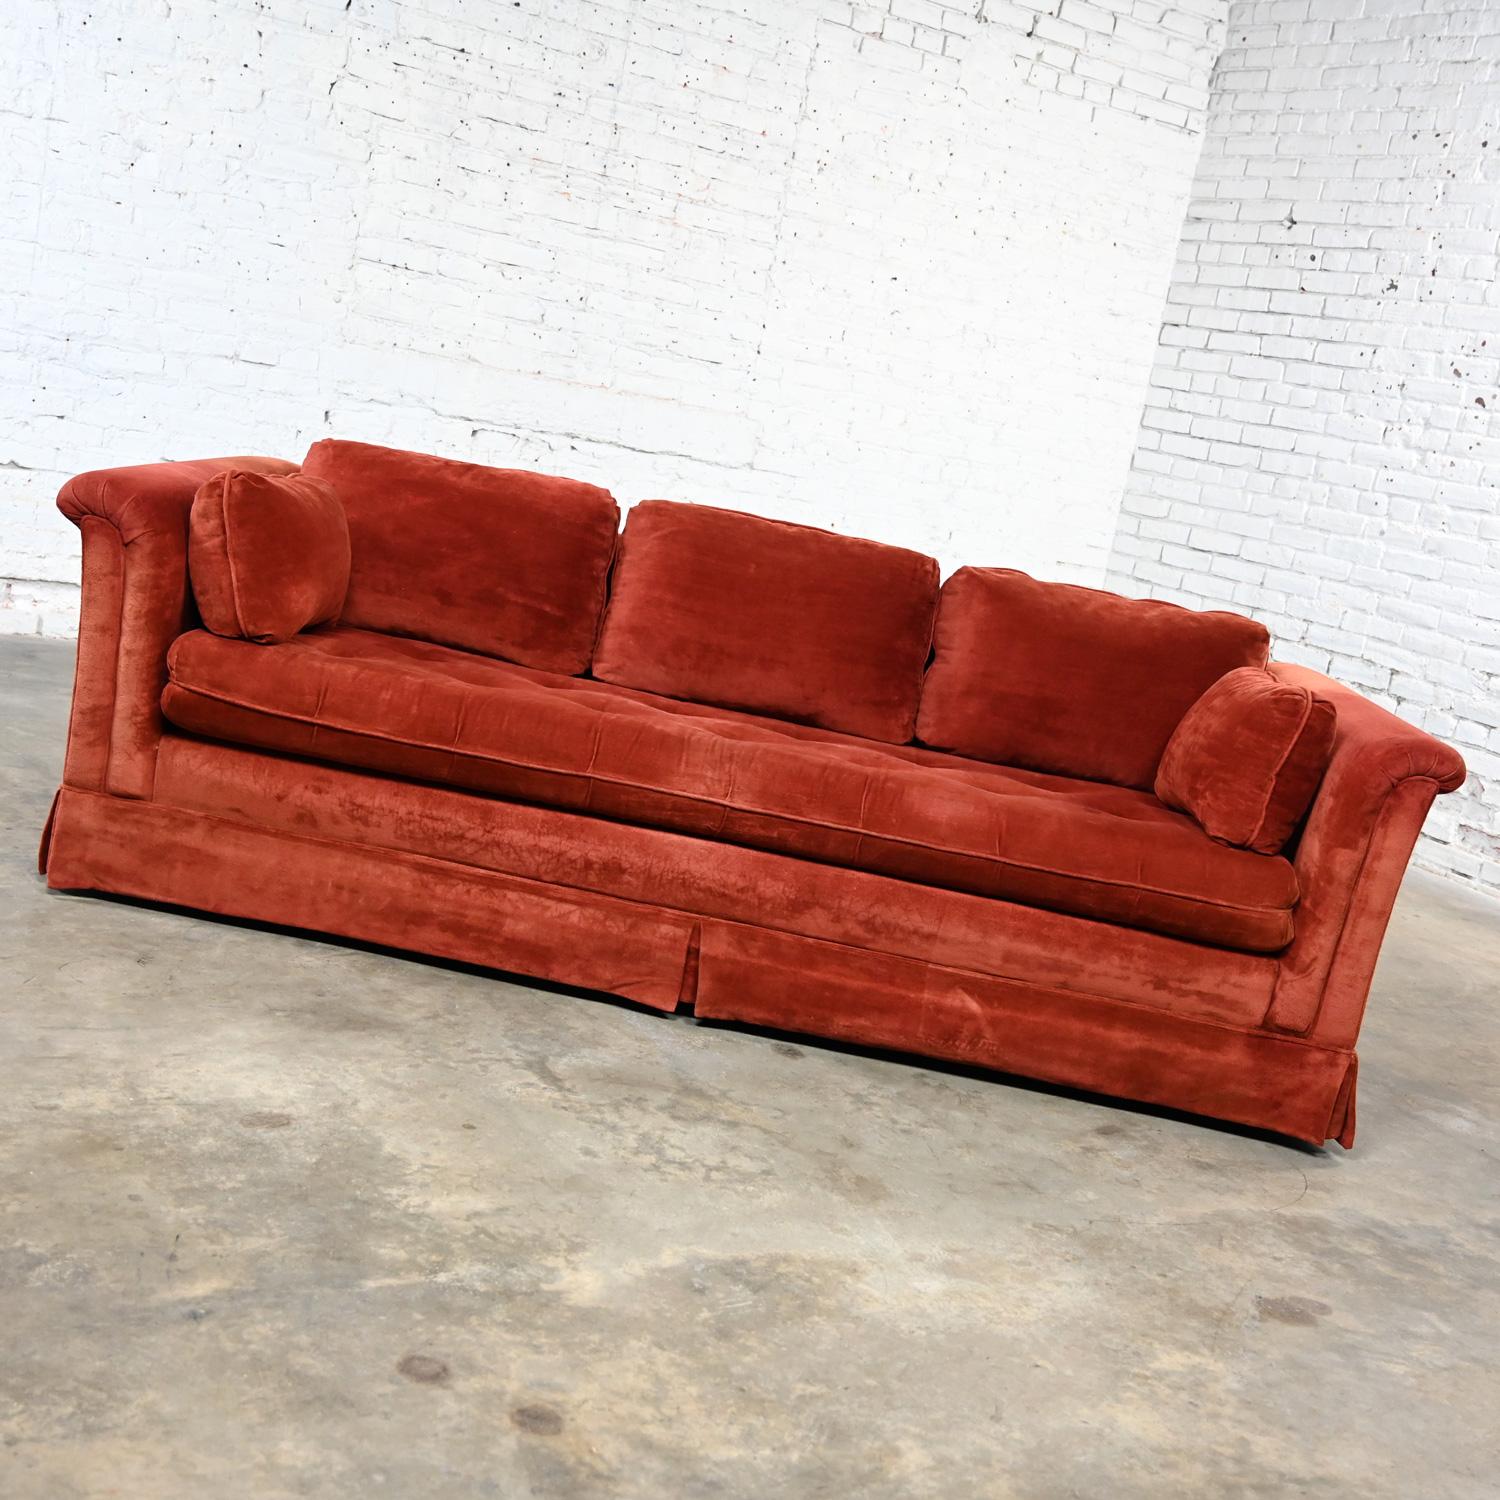 1970 couch